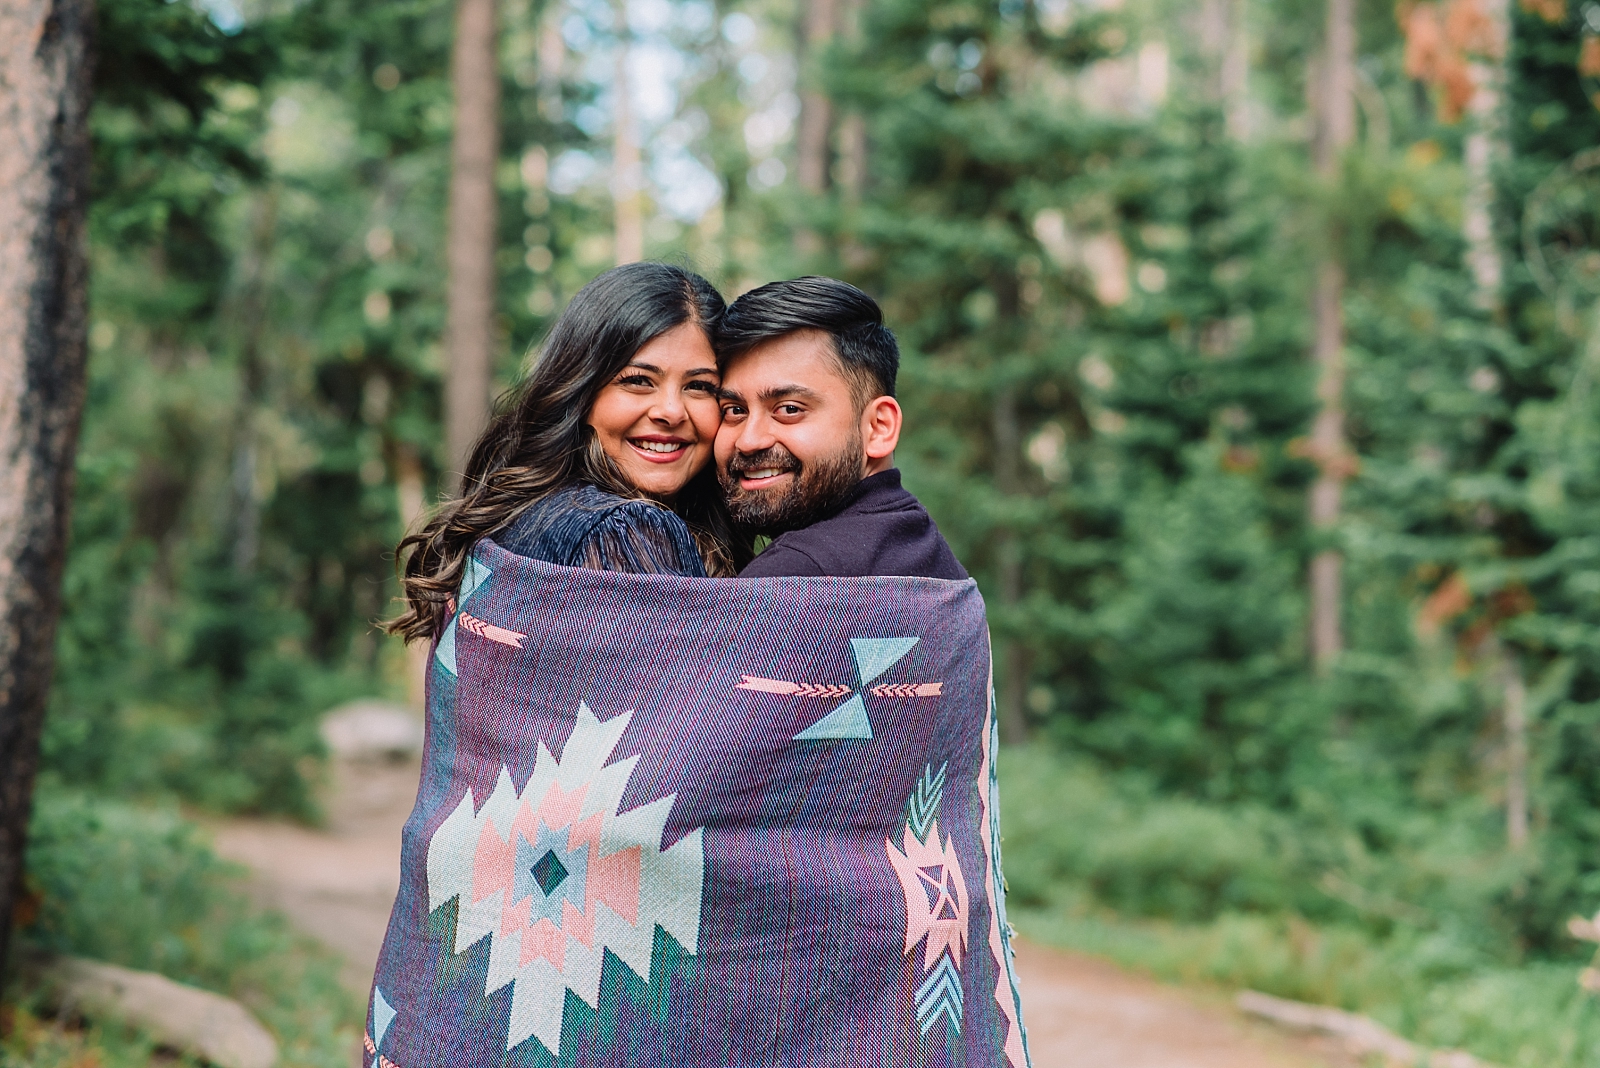 Forest engagement photos